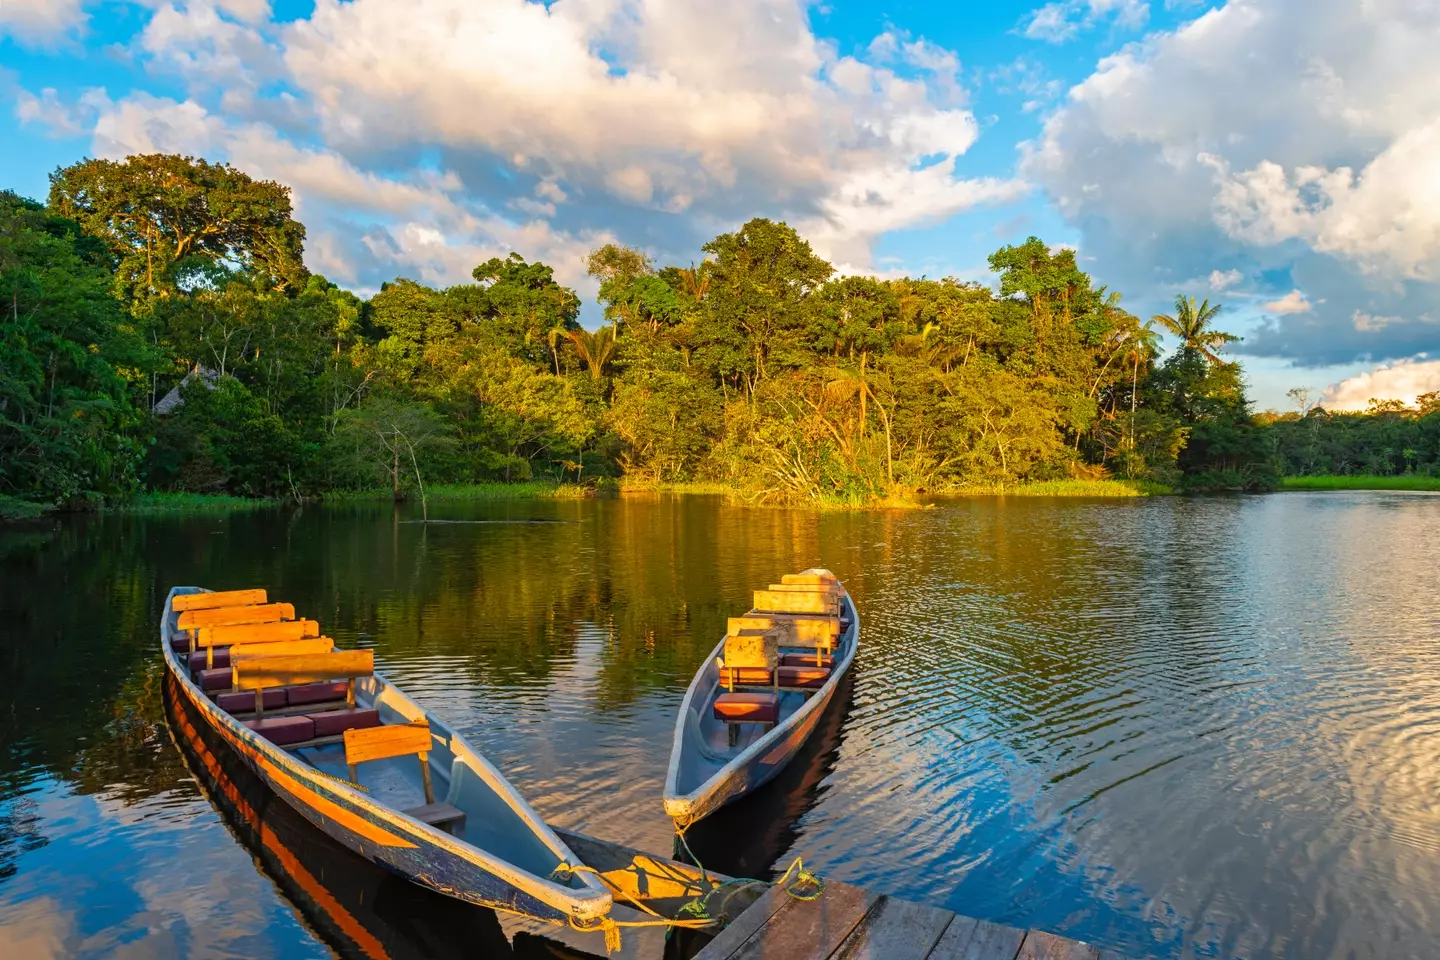 Boats can be used to cross the Amazon river.